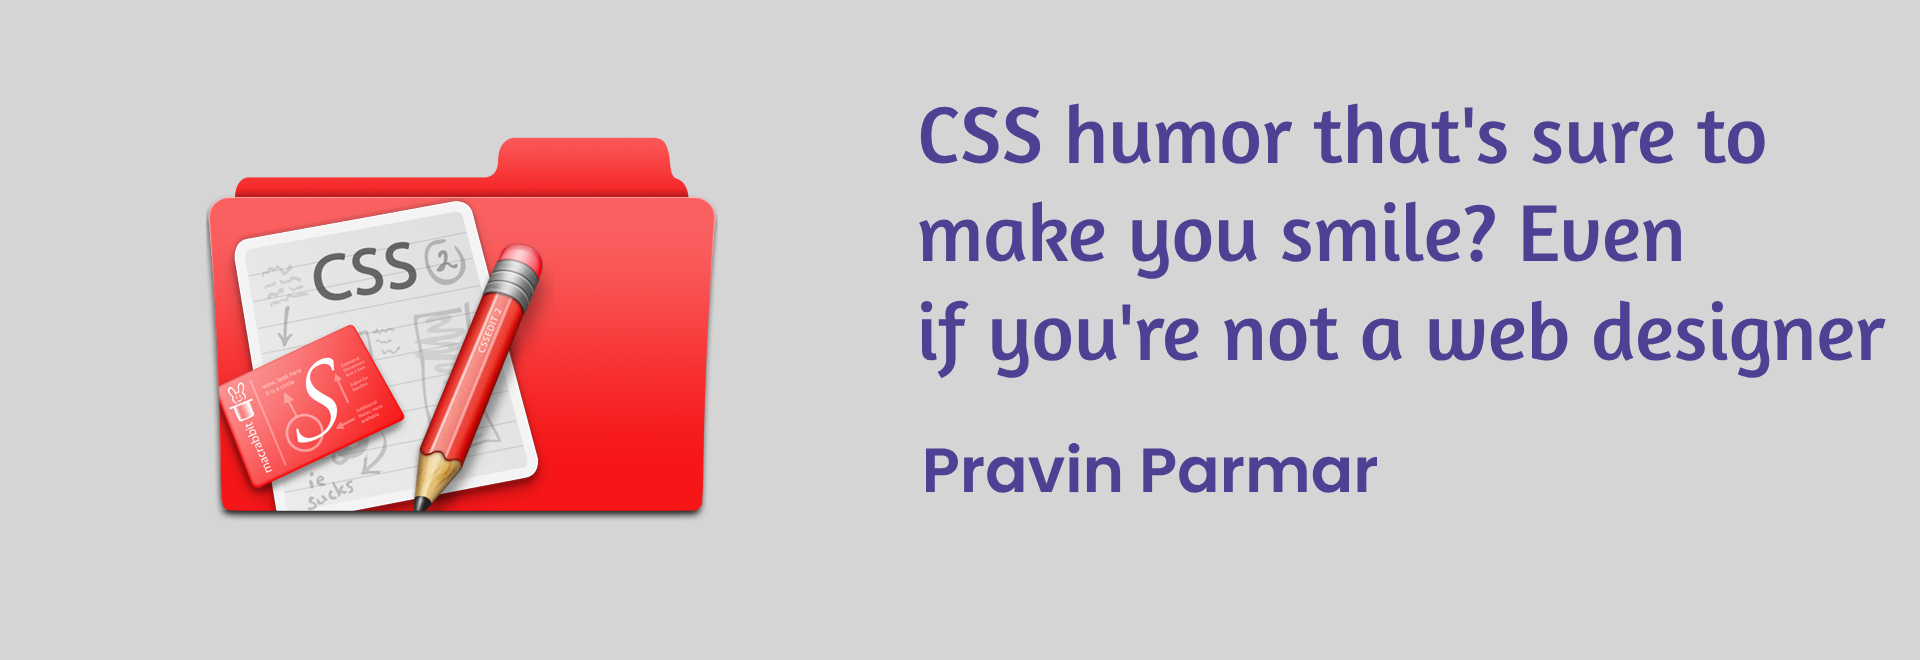 CSS humor that’s sure to make you smile? Even if you’re not a web designer